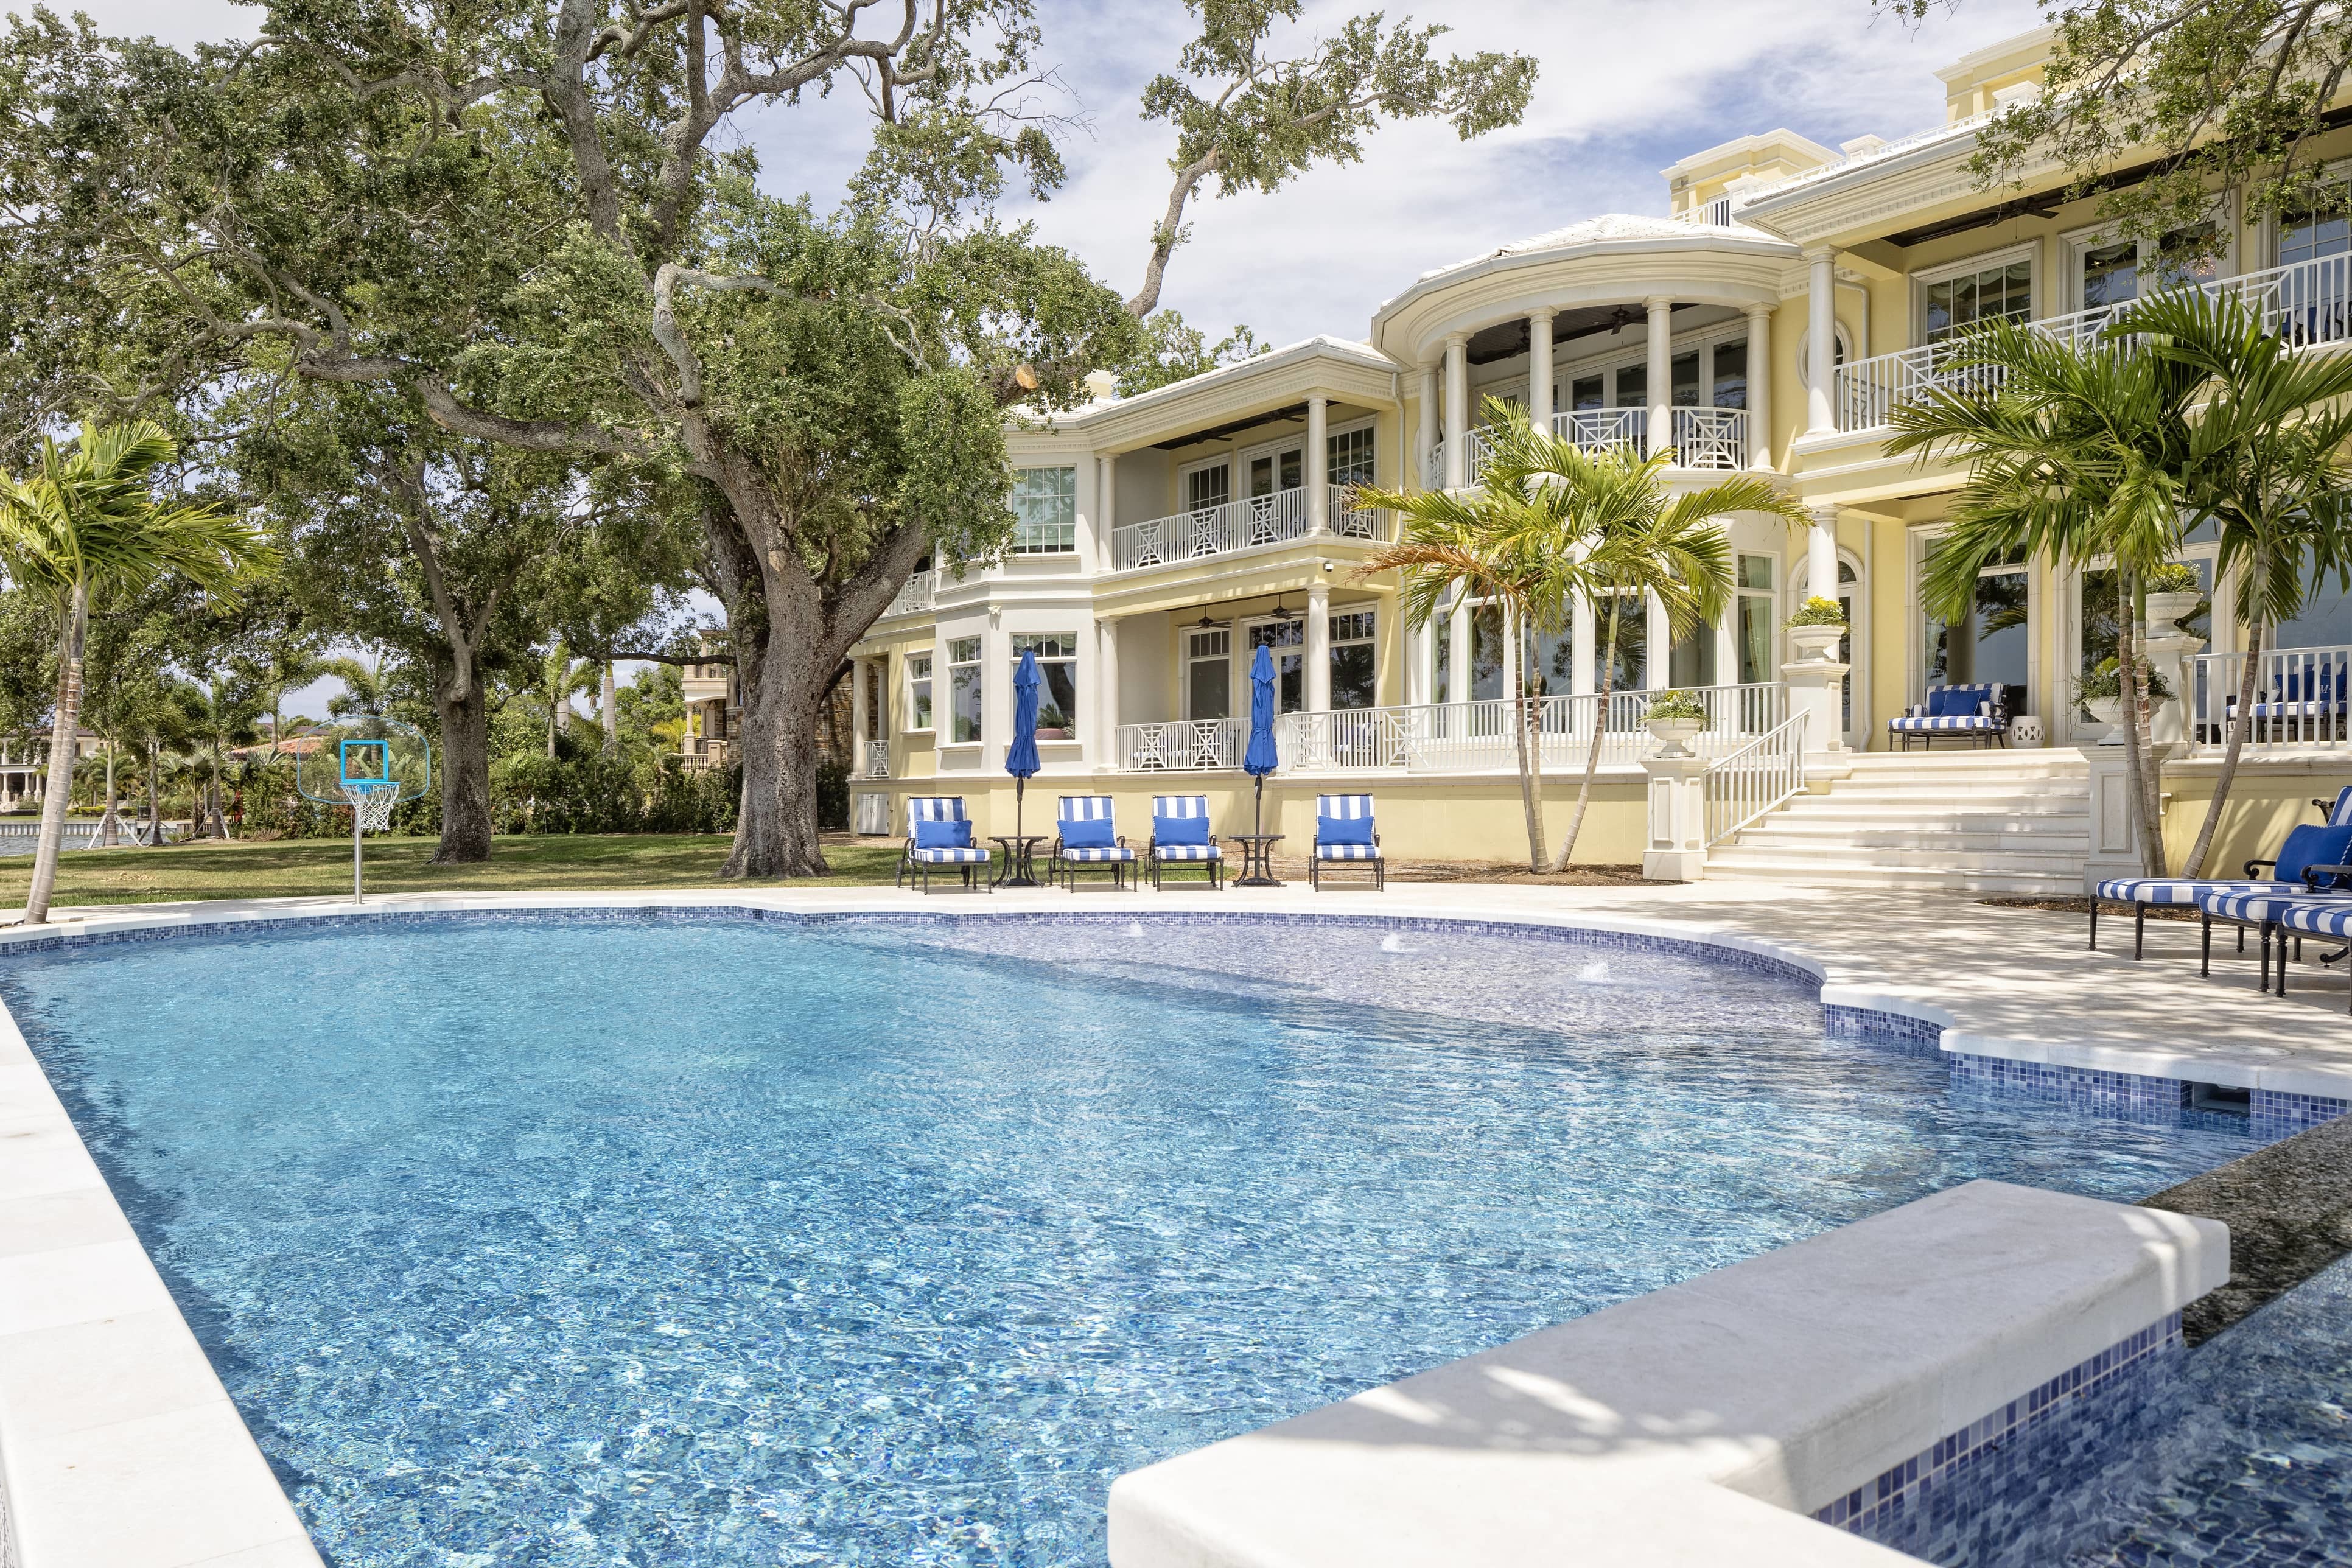 A beautiful pool in the back yard of a Tampa, Florida mansion.